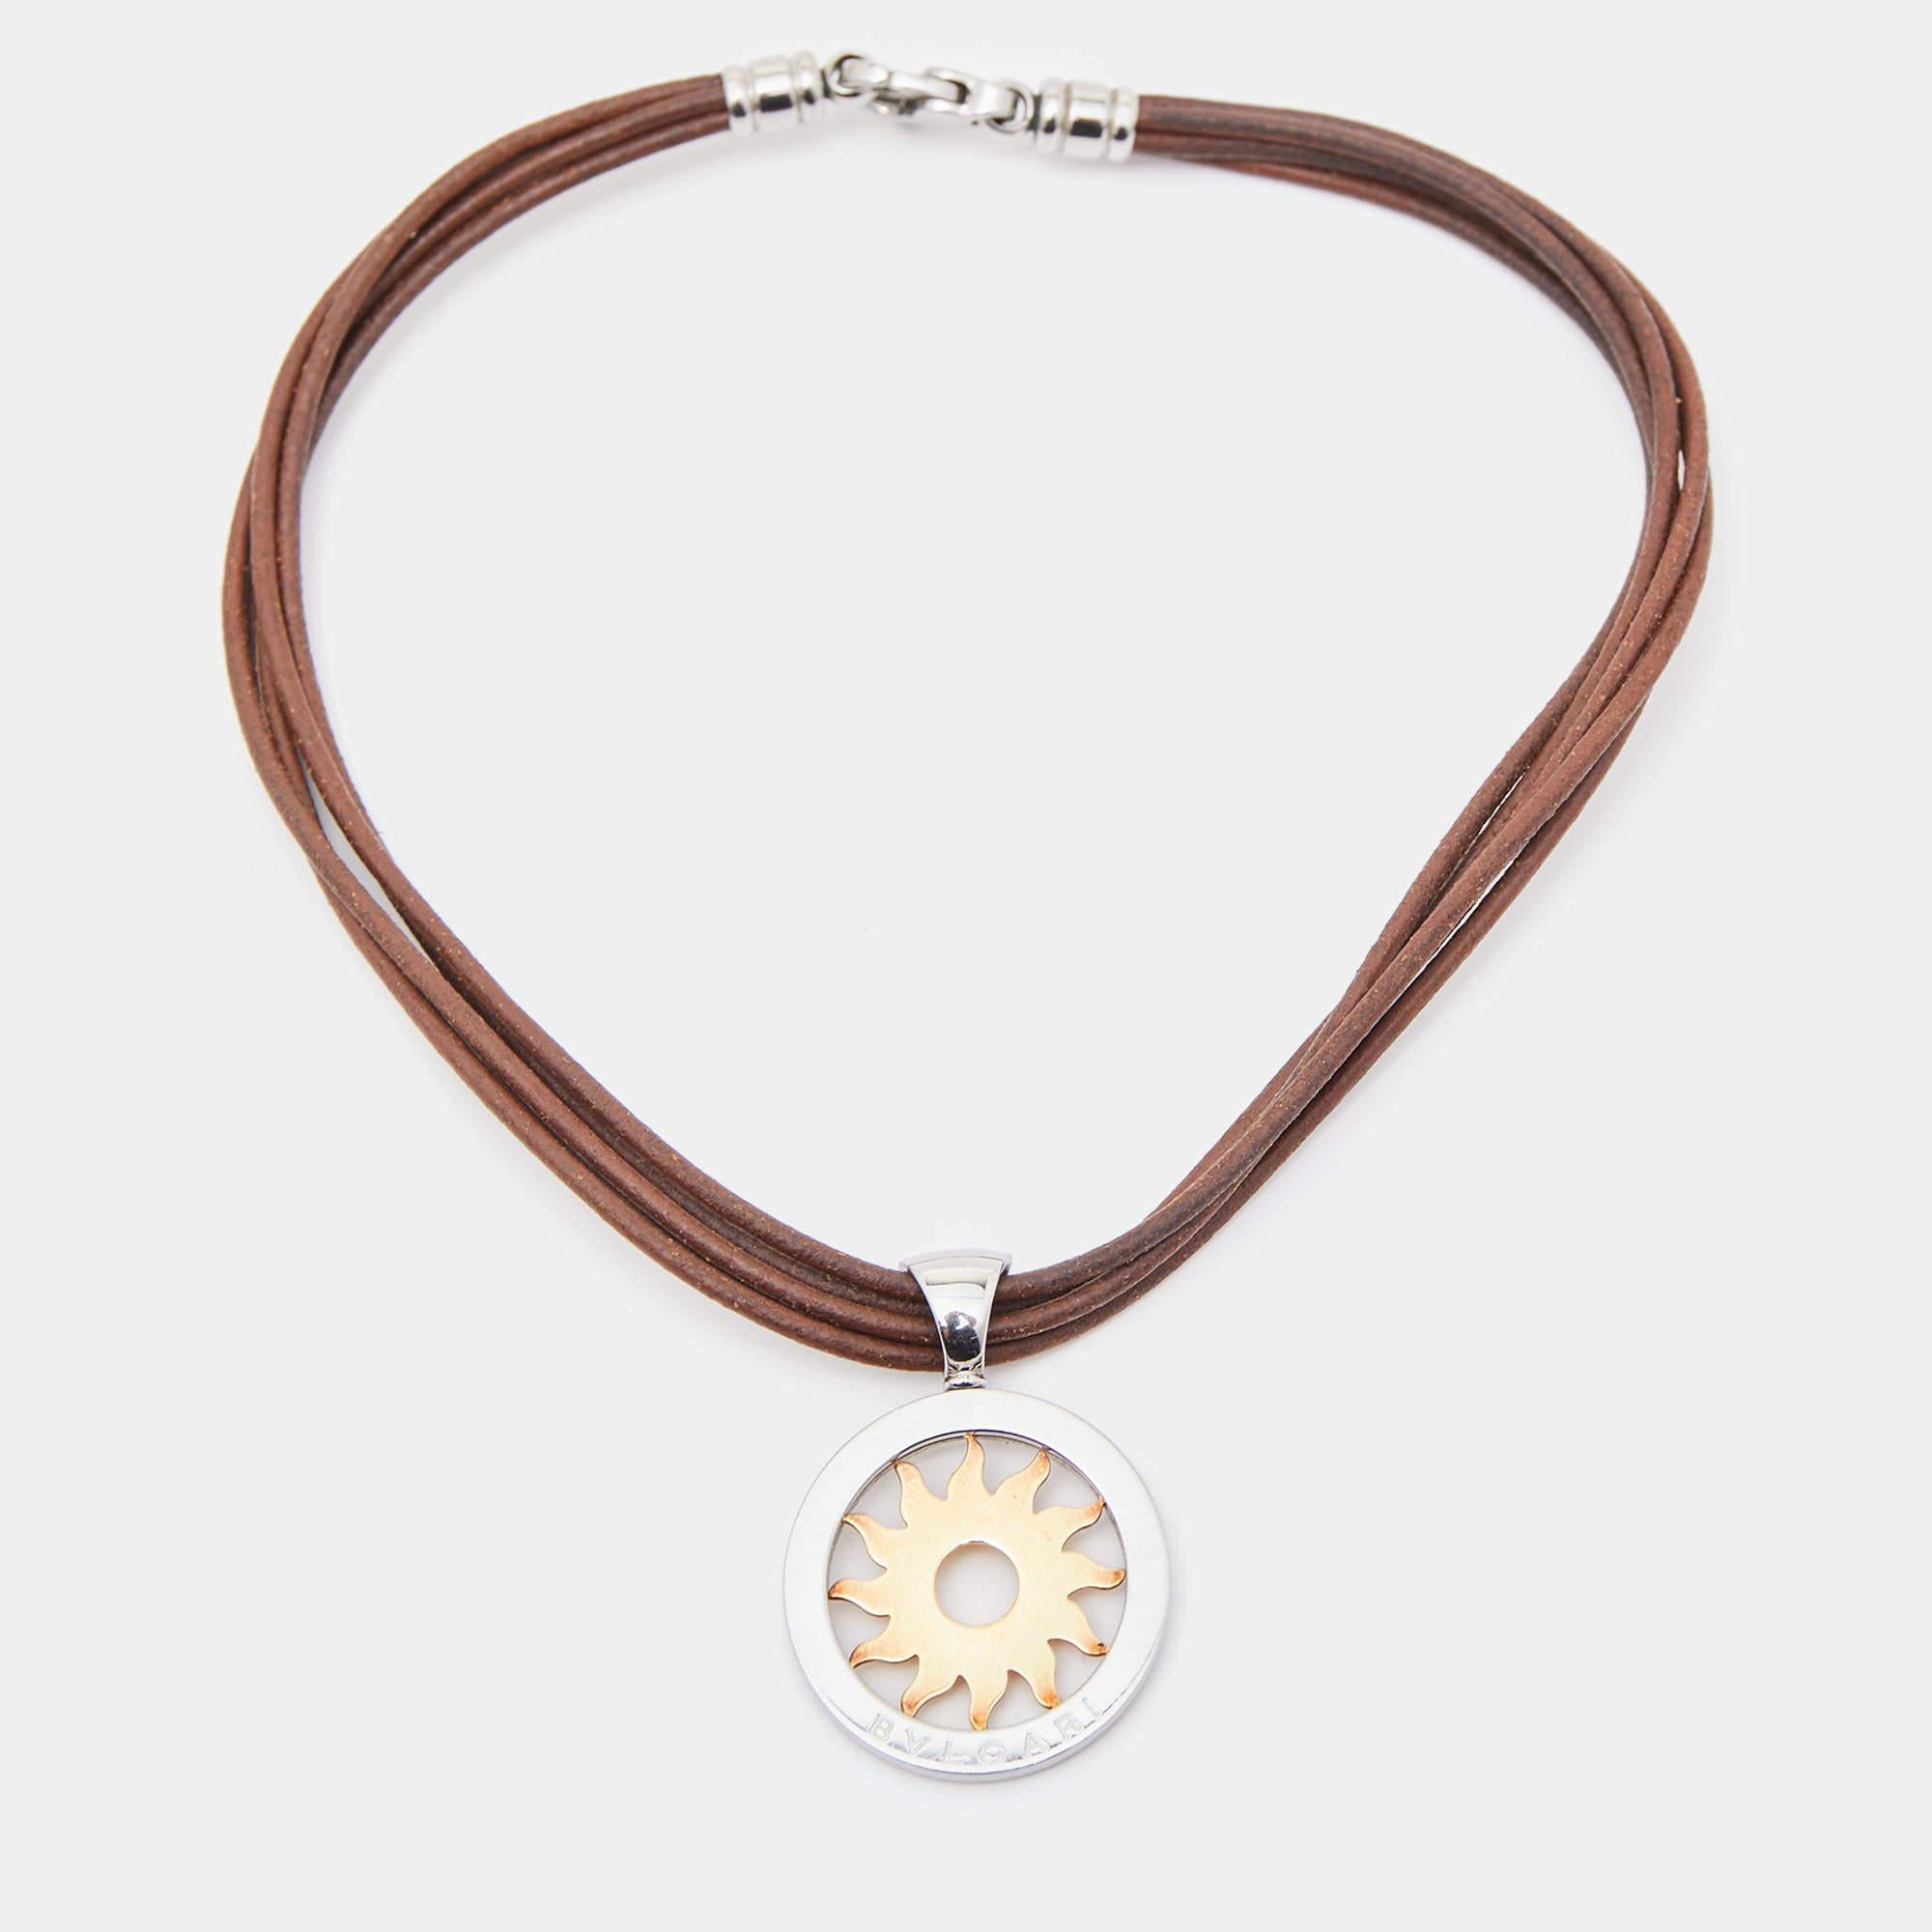 The Bvlgari Tondo necklace seamlessly blends stainless steel and 18k yellow gold, forming a radiant pendant. A leather cord adds a touch of luxury. The design exudes modern elegance, combining materials harmoniously for a versatile accessory that